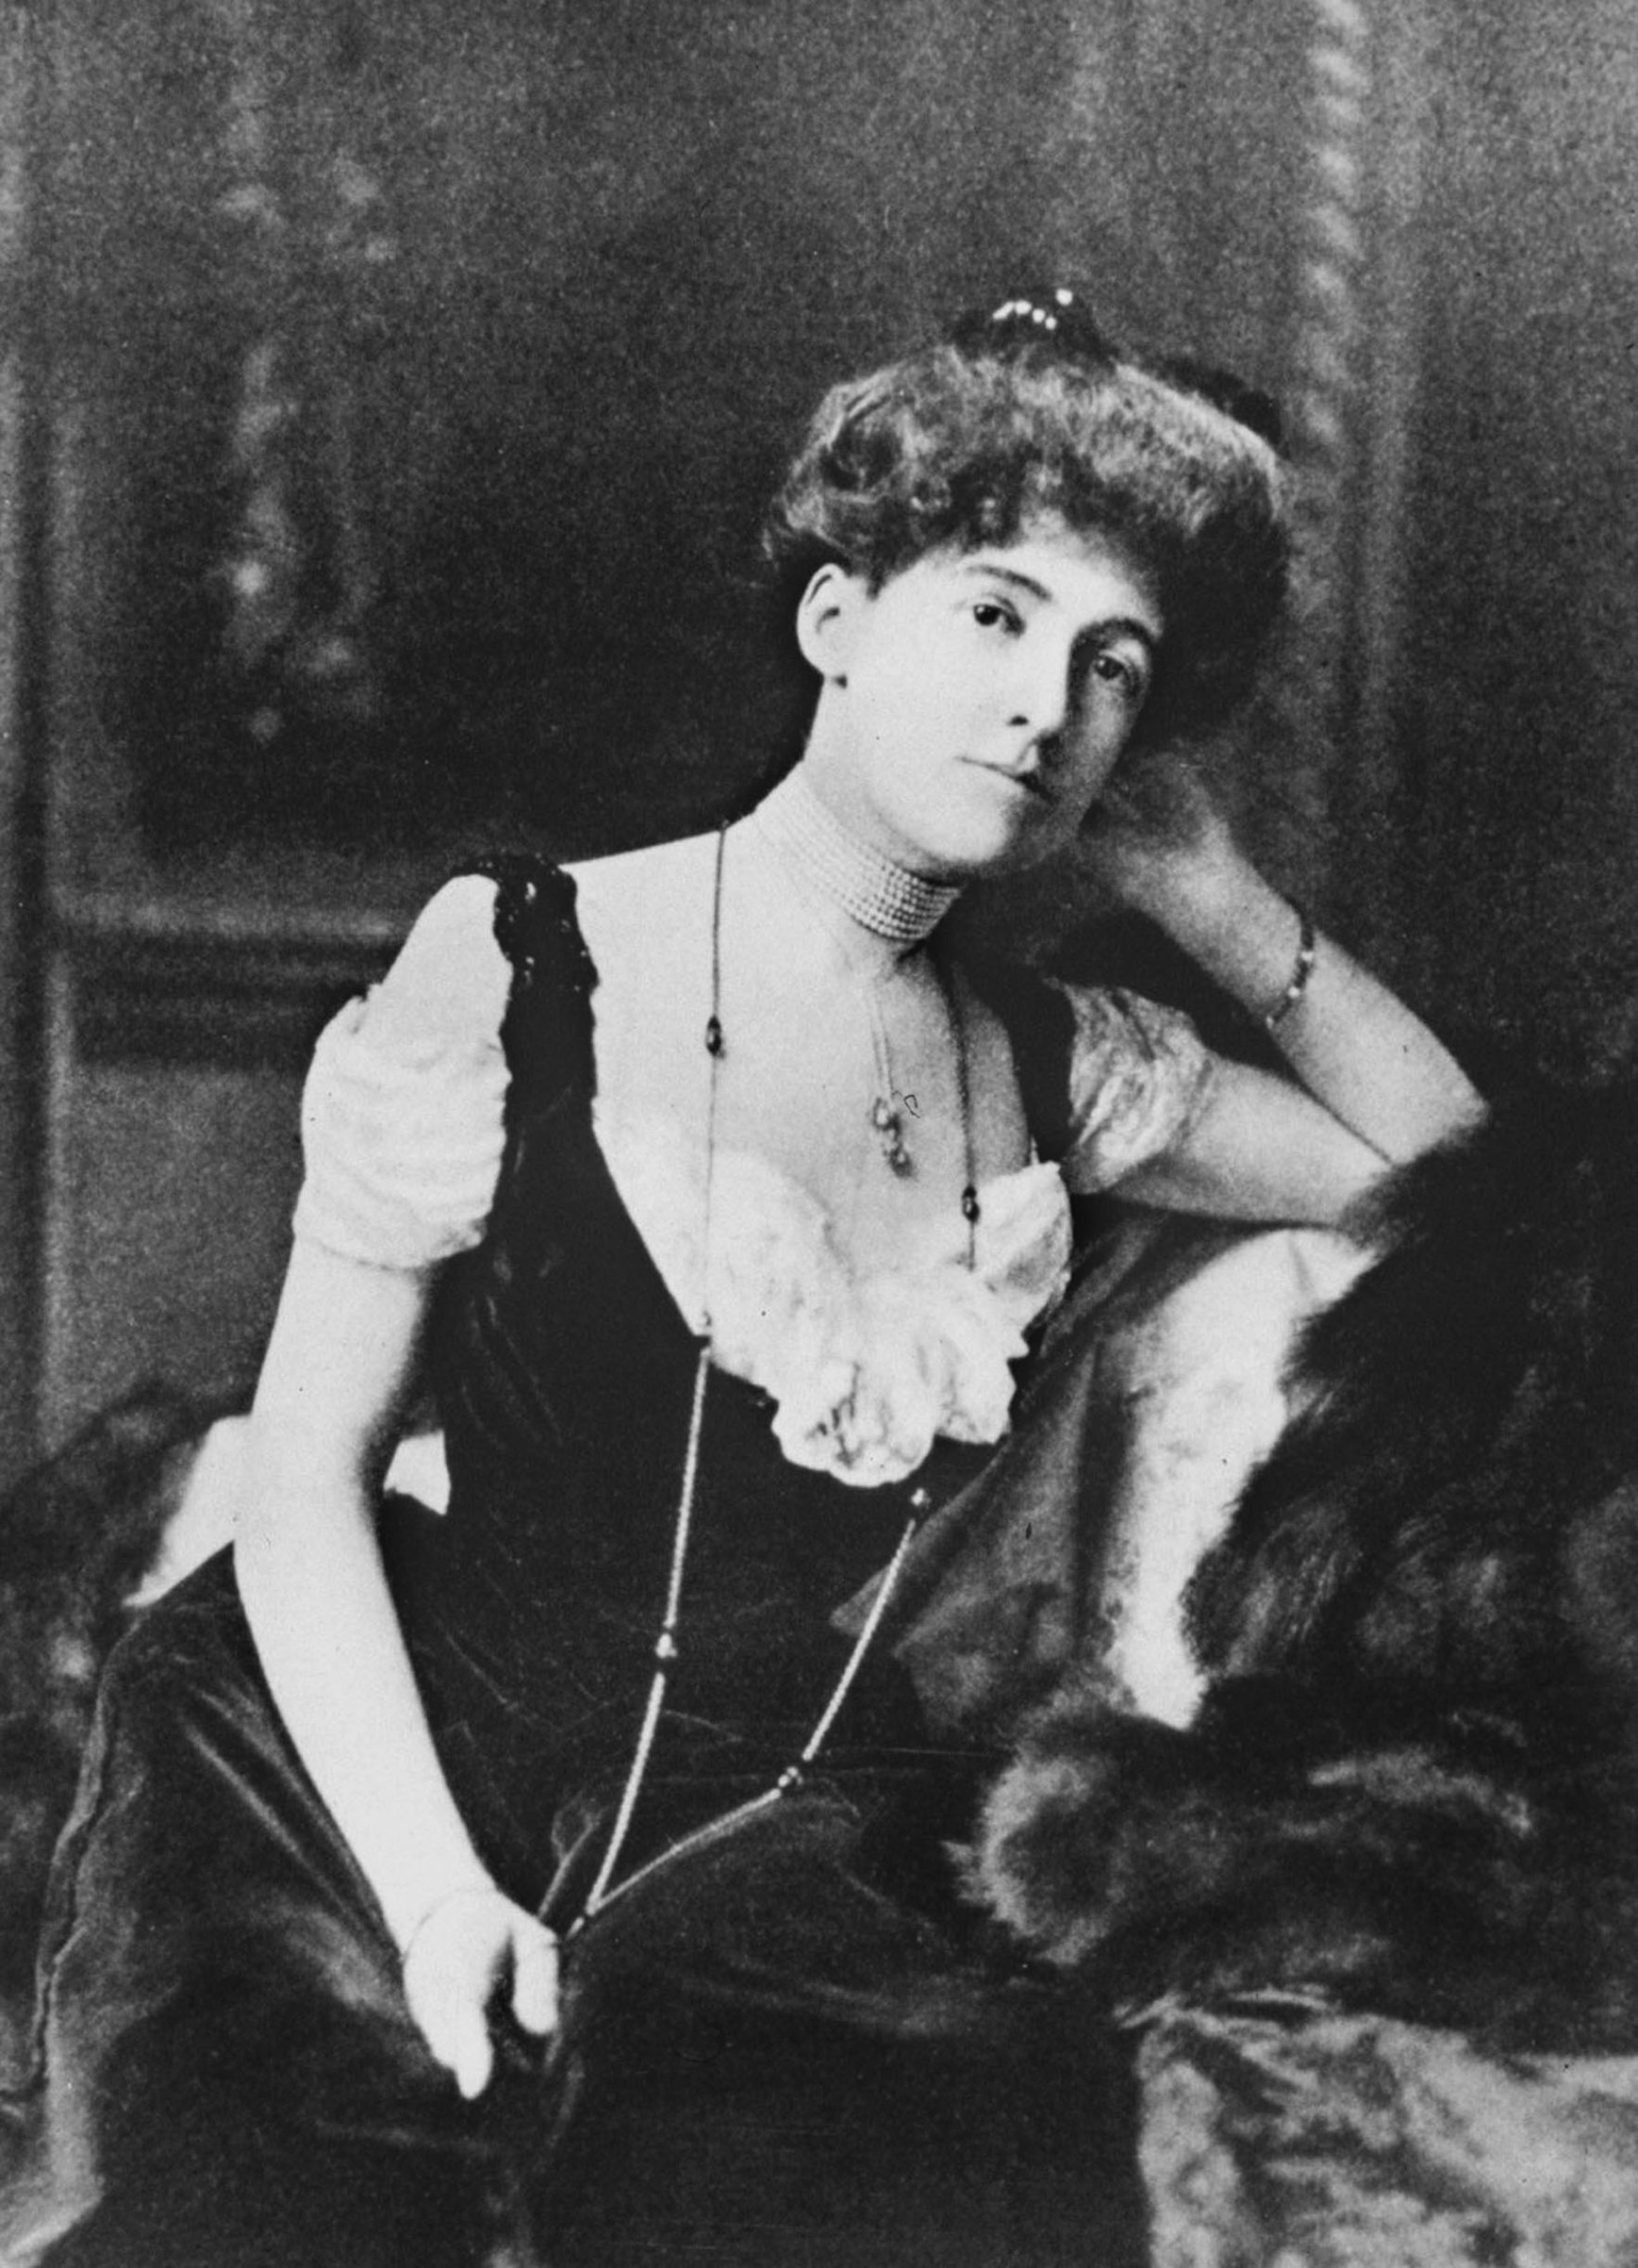 EDITH WHARTON: The first woman in America to win the Pulitzer prize for fiction, 1921.